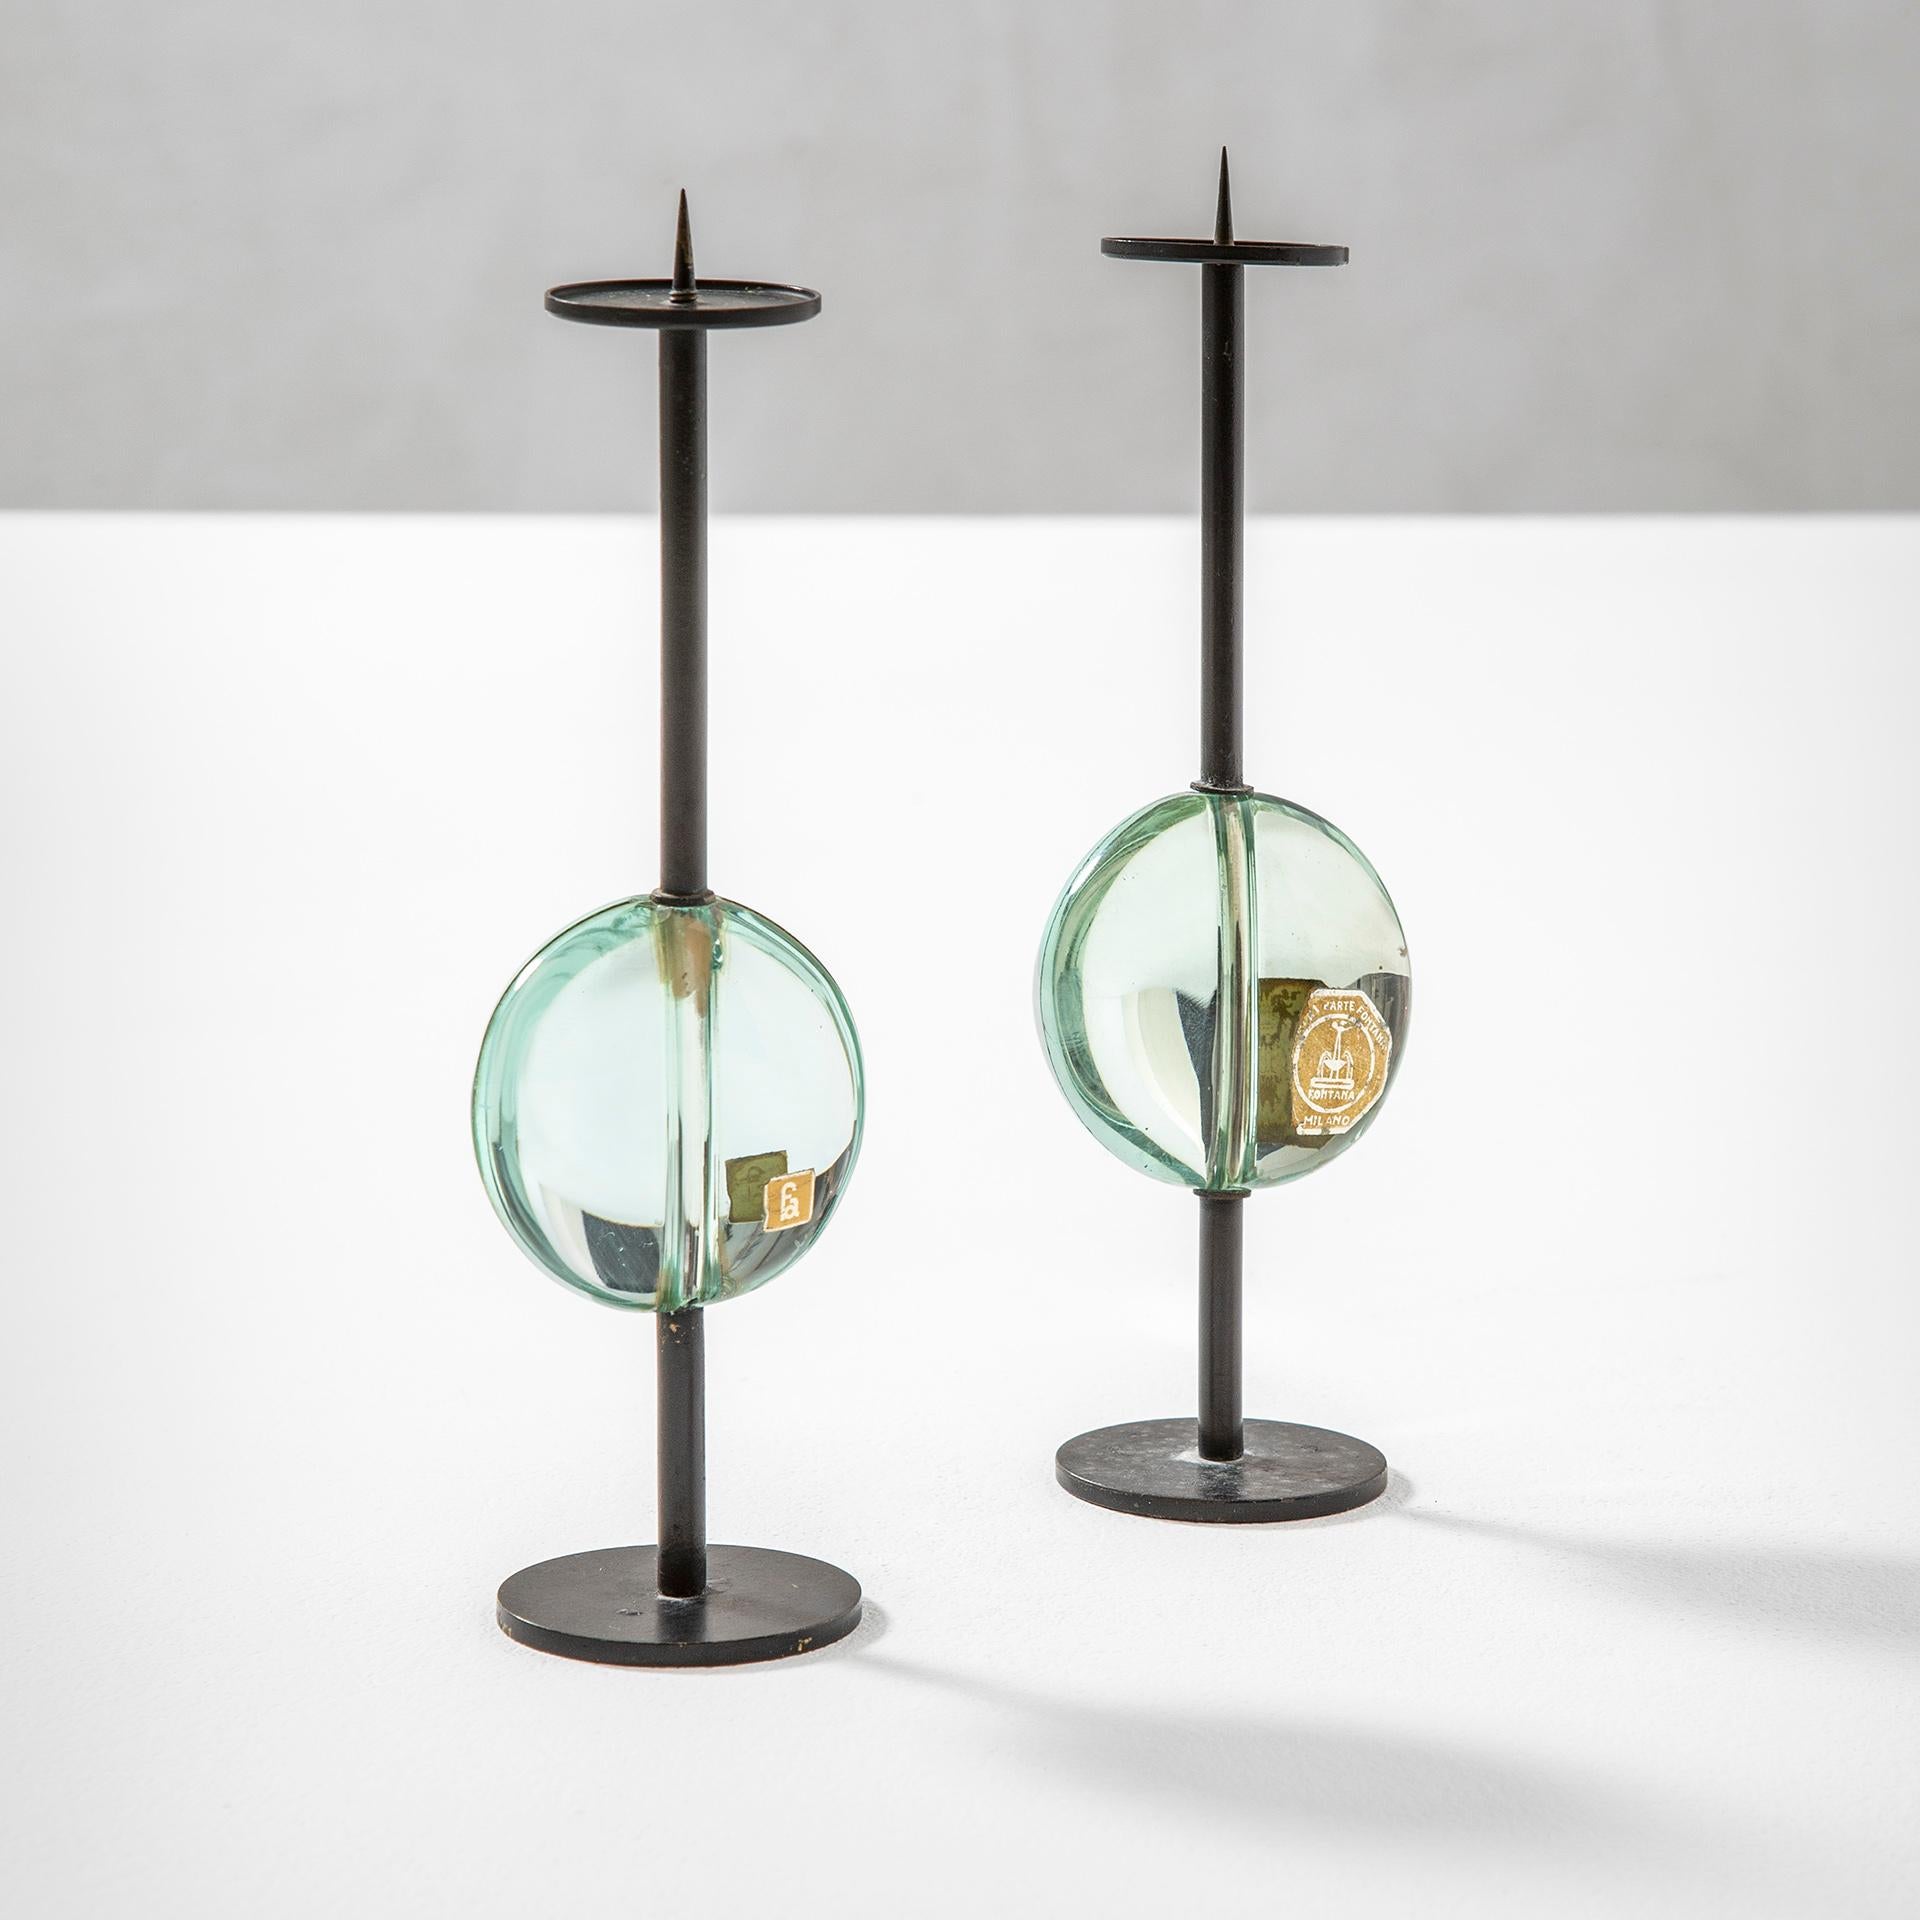 Pair of candleholders designed by Max Ingrand for Fontana Arte.
The couple of candleholders are in metal with a handmade decoration in glass. Each Candleholder has the original Fontana Arte markbrand as shown in photos.
Great idea for wedding's